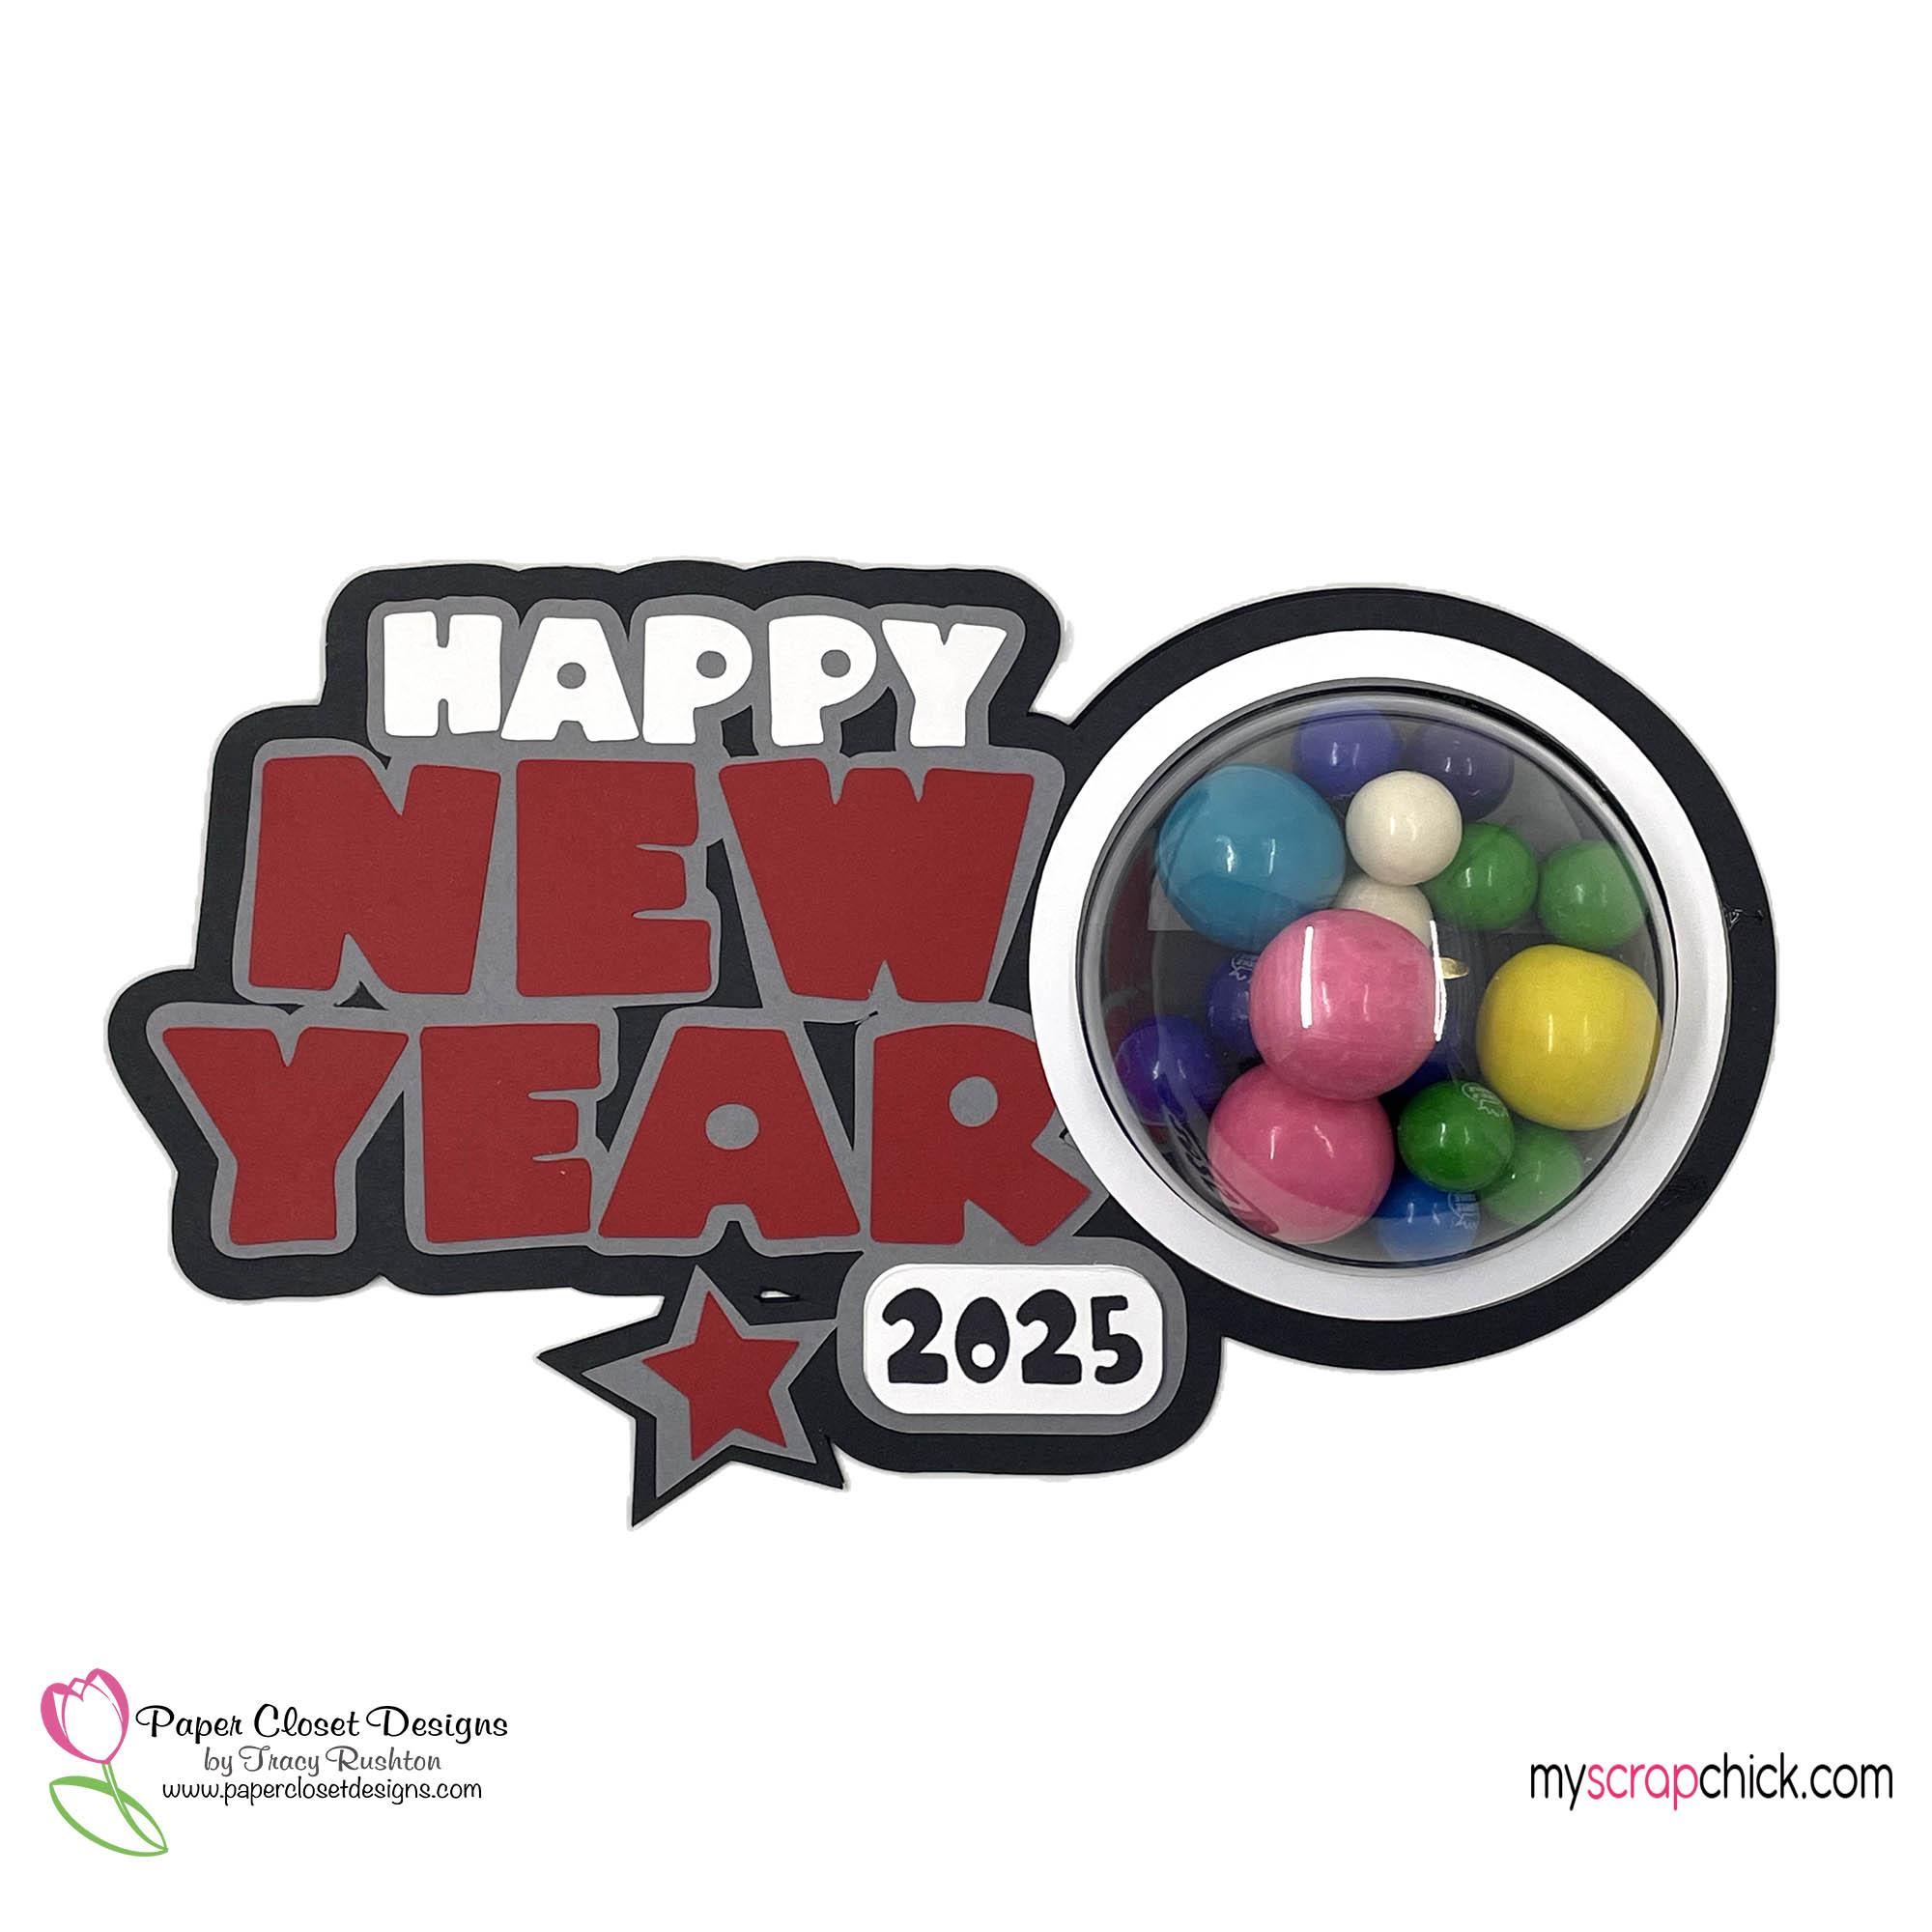 Happy New Year 2025 Dome Candy Holder